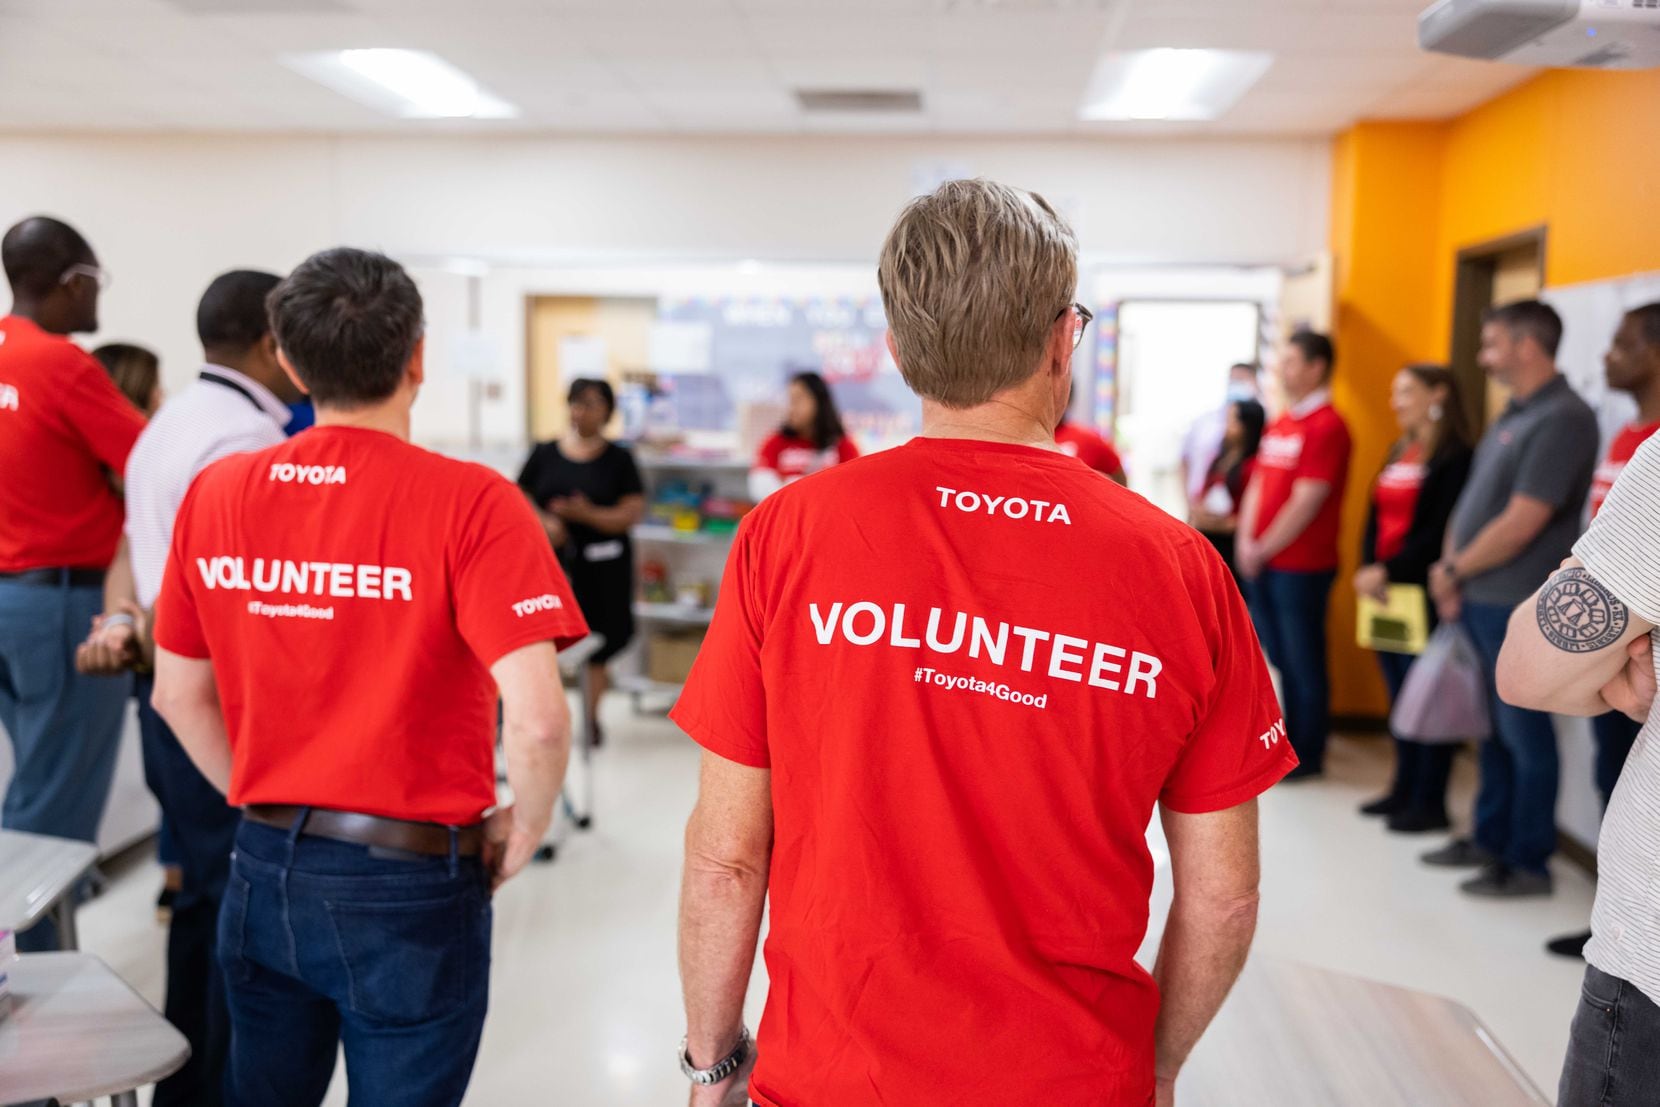 Several volunteers in red T-shirts stand in a classroom with other people.